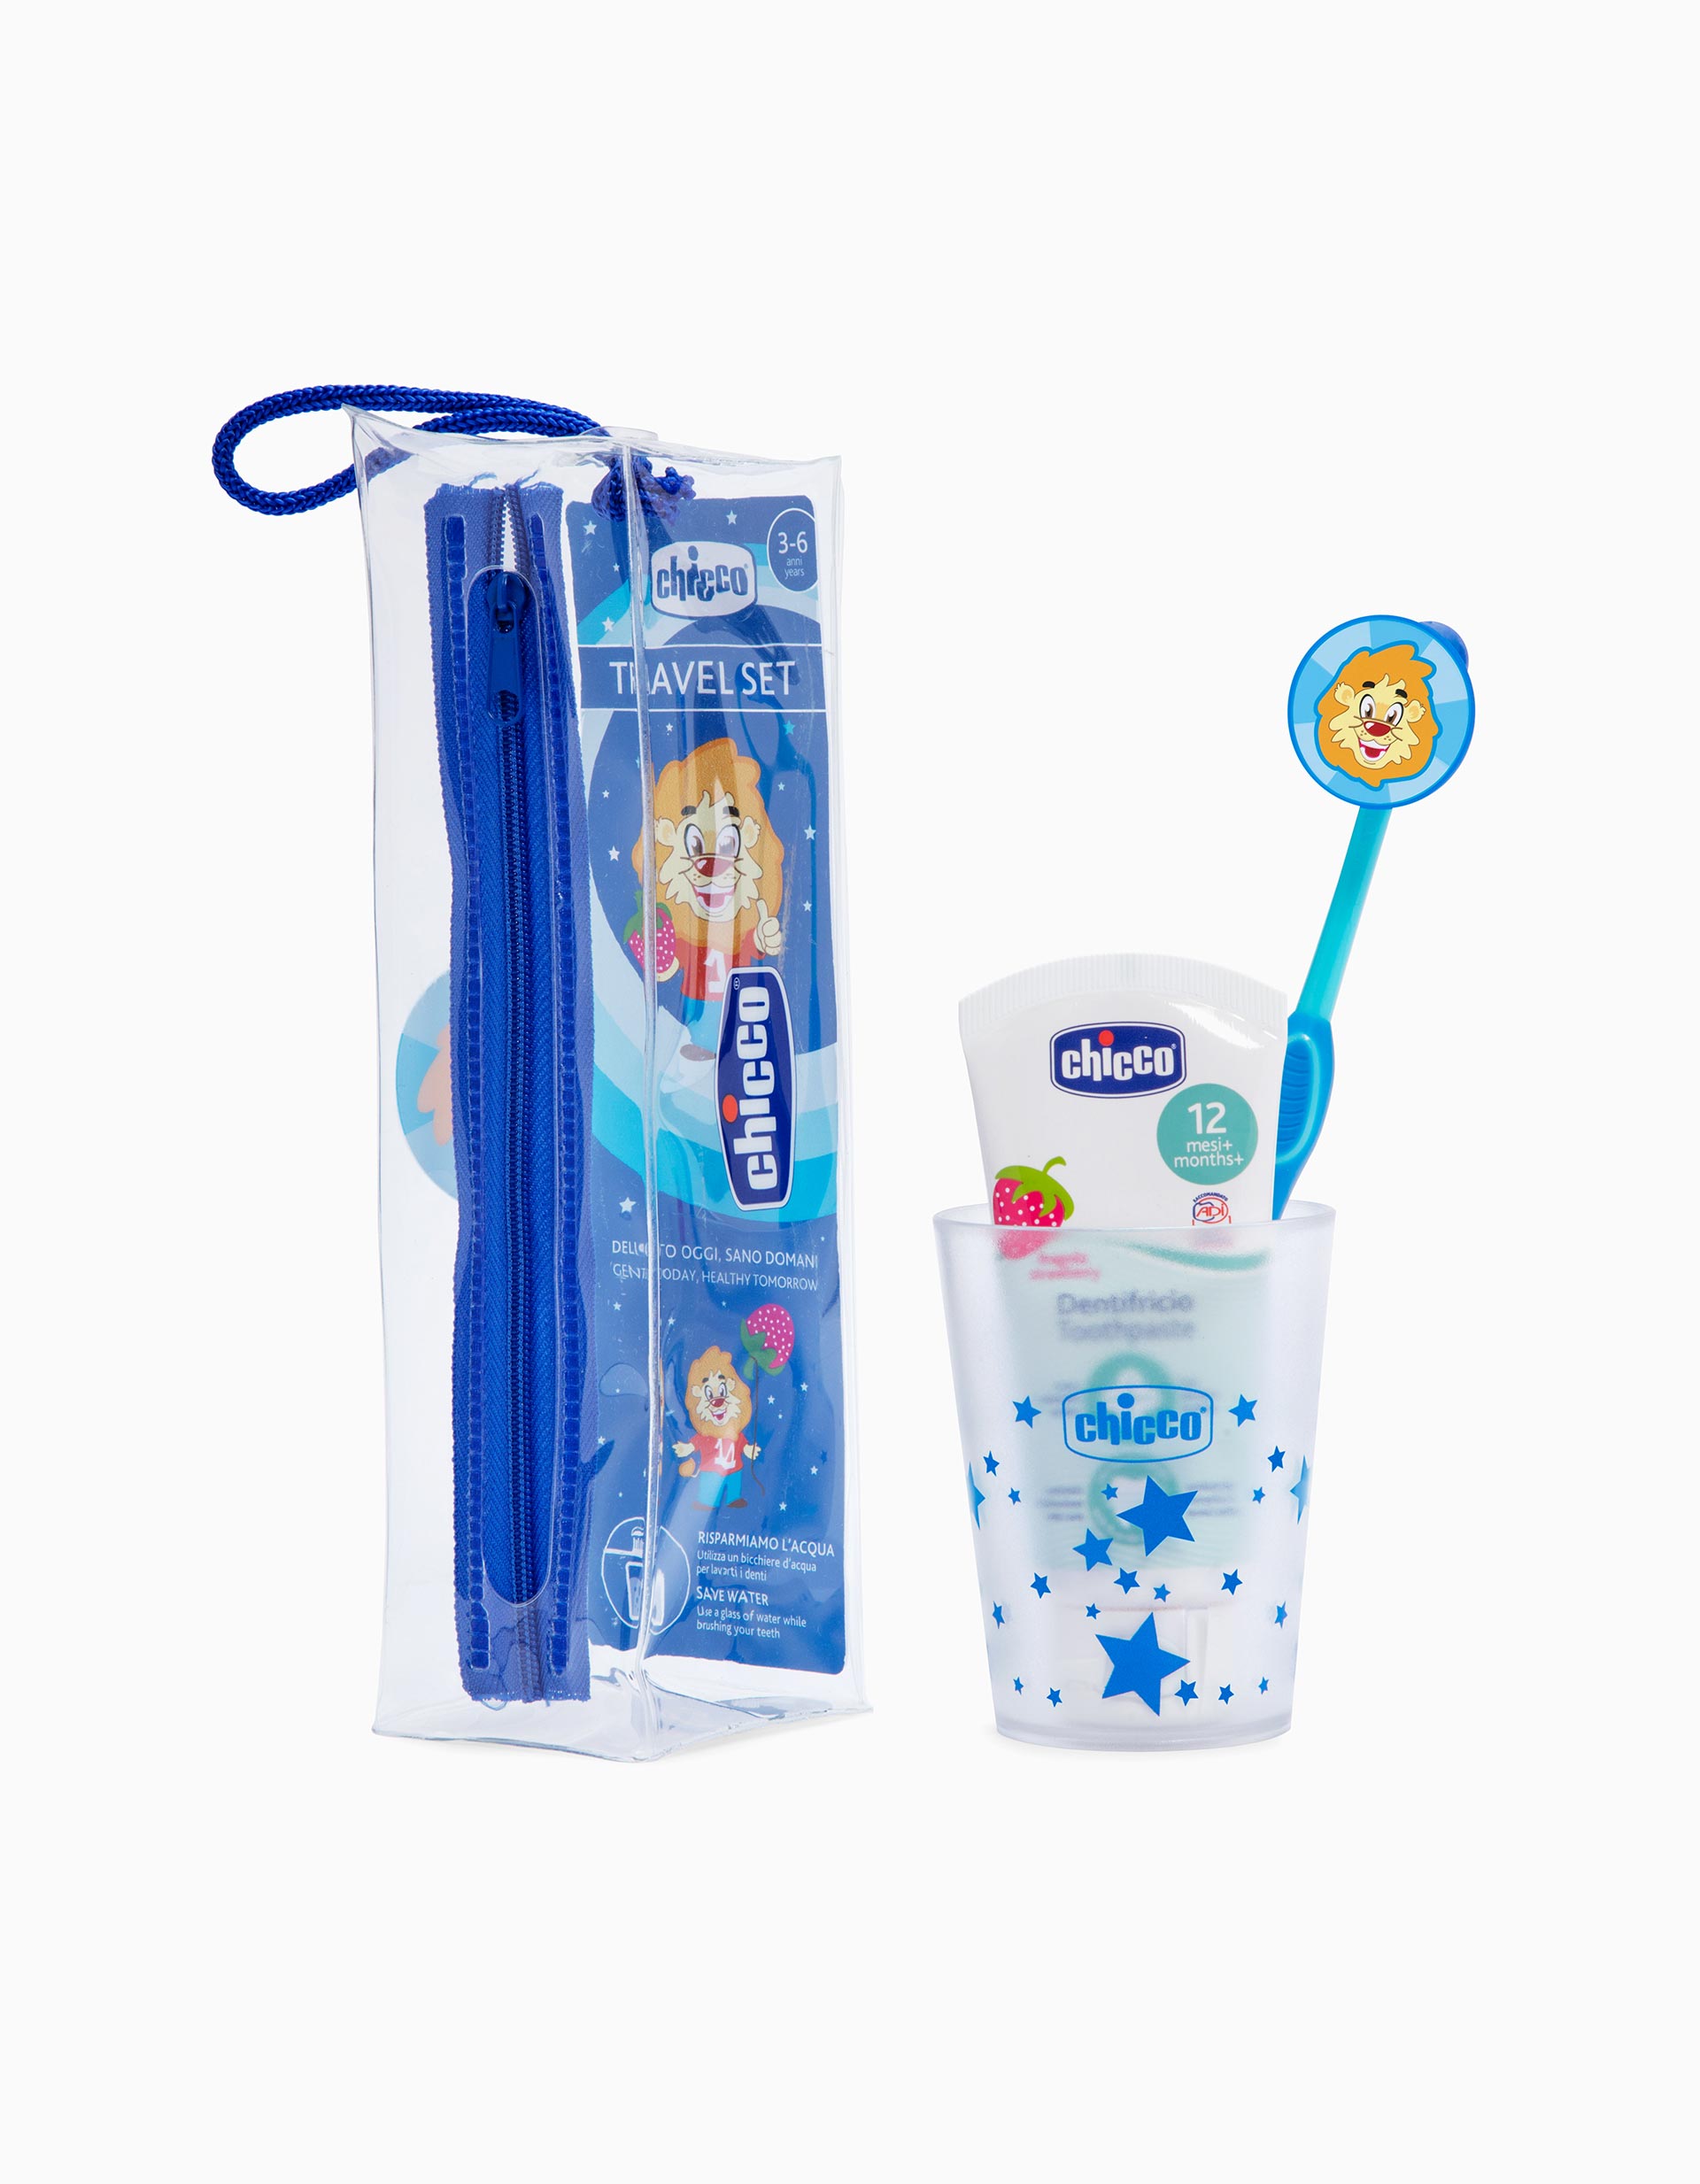 Hygiene Set 3-6 years, by Chicco